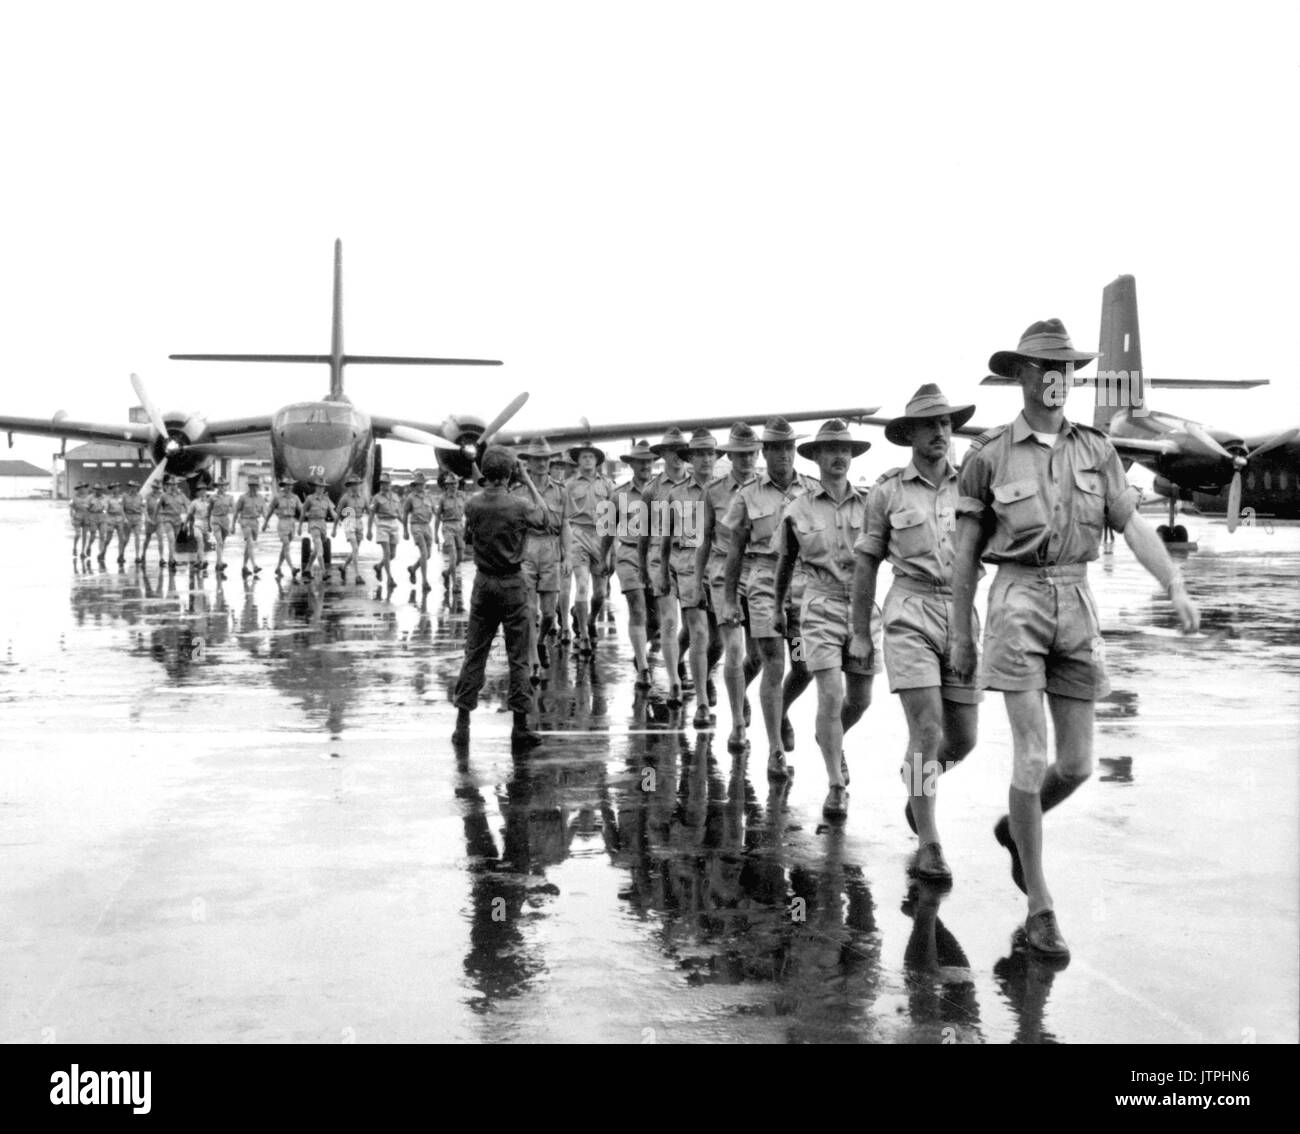 A contingent of the Royal Australian Air Force arrives at Tan Son Nhut Airport, Saigon, to work with the South Vietnamese and U.S. Air Forces in transporting soldiers and supplies to combat areas in South Viet-nam.  August 10, 1964.  Army NARA FILE #:  306-PSC-64-5382 WAR & CONFLICT BOOK #:  393 Stock Photo